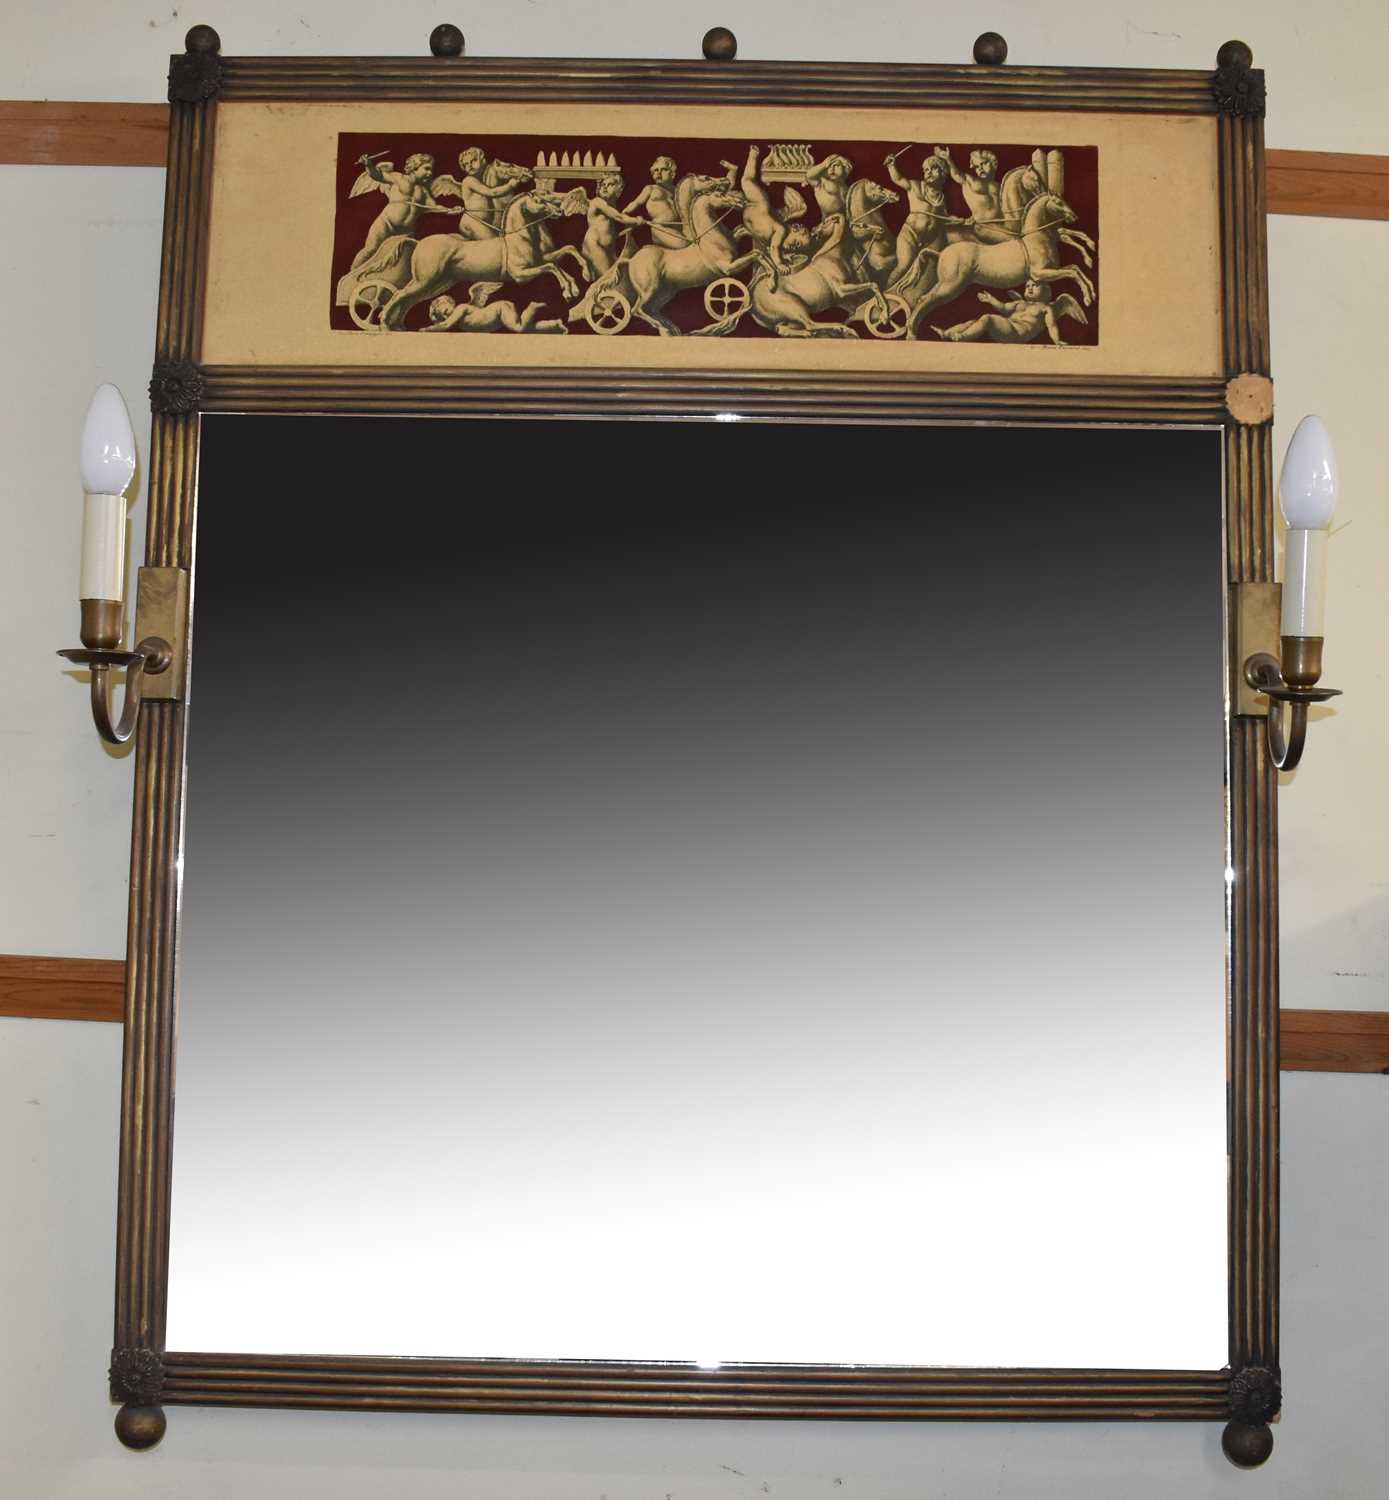 A decorative Regency style gilt framed wall mirror with Classical style frieze and set with pair